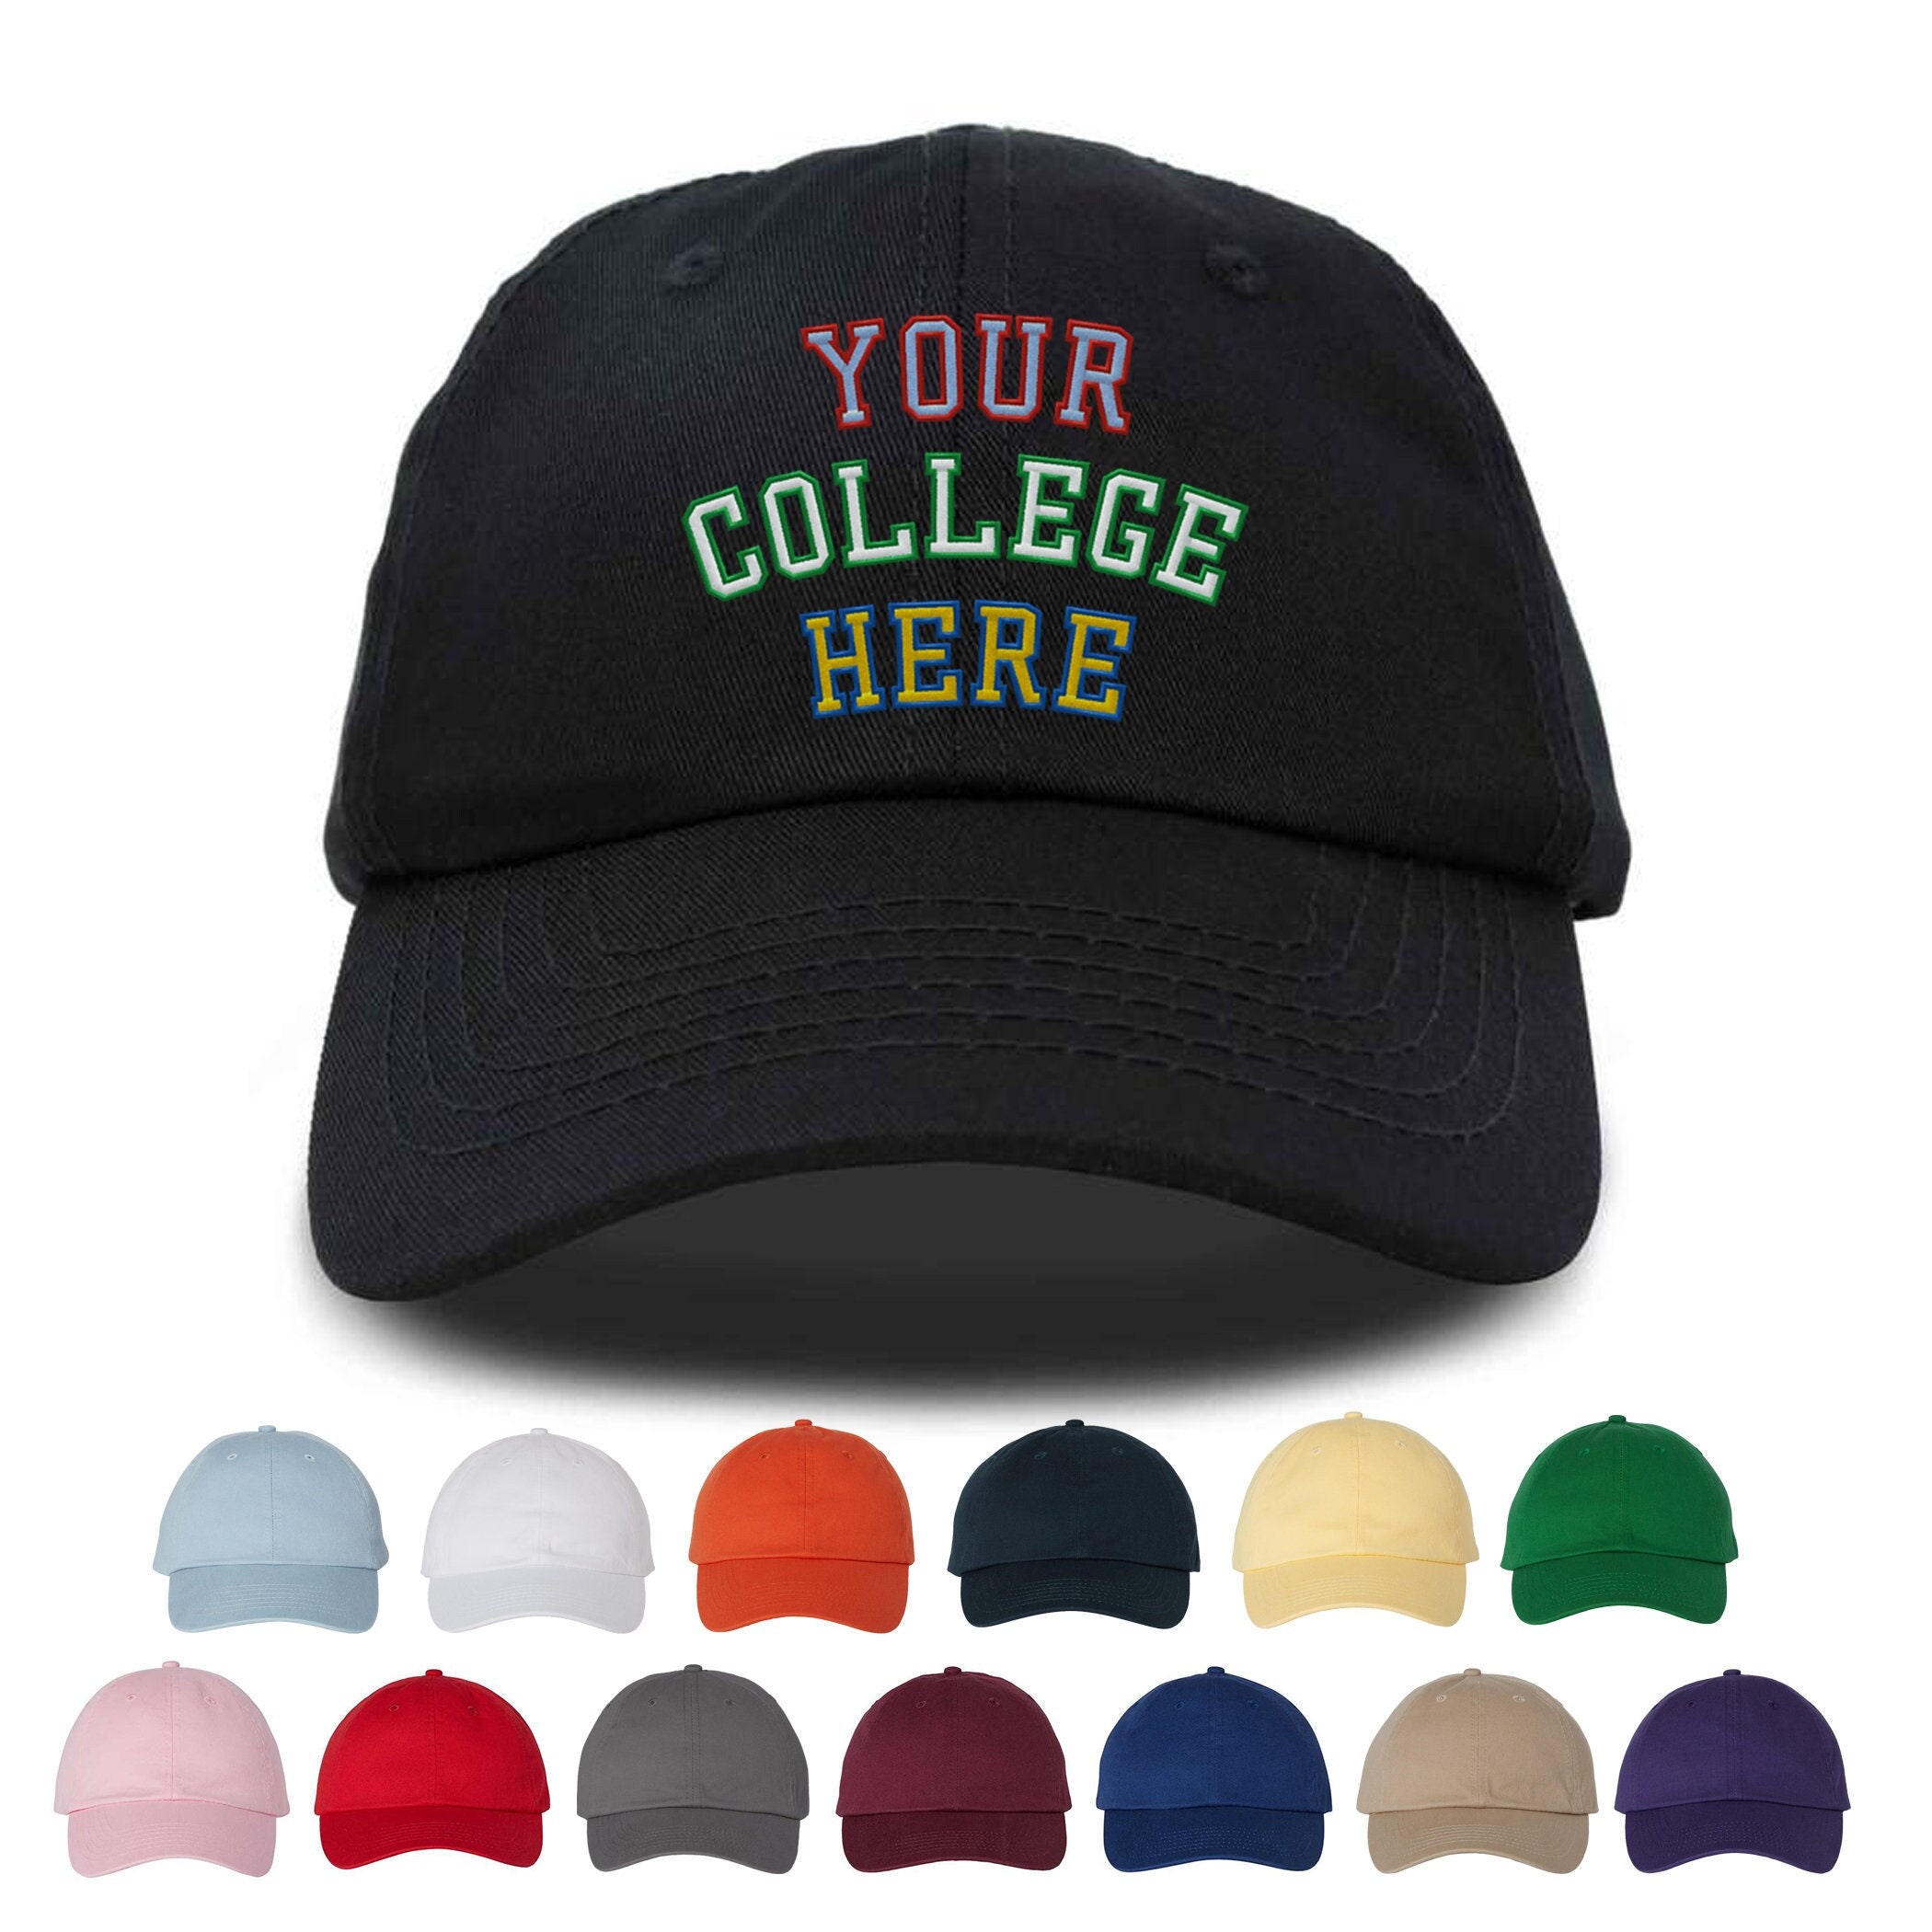 College hats